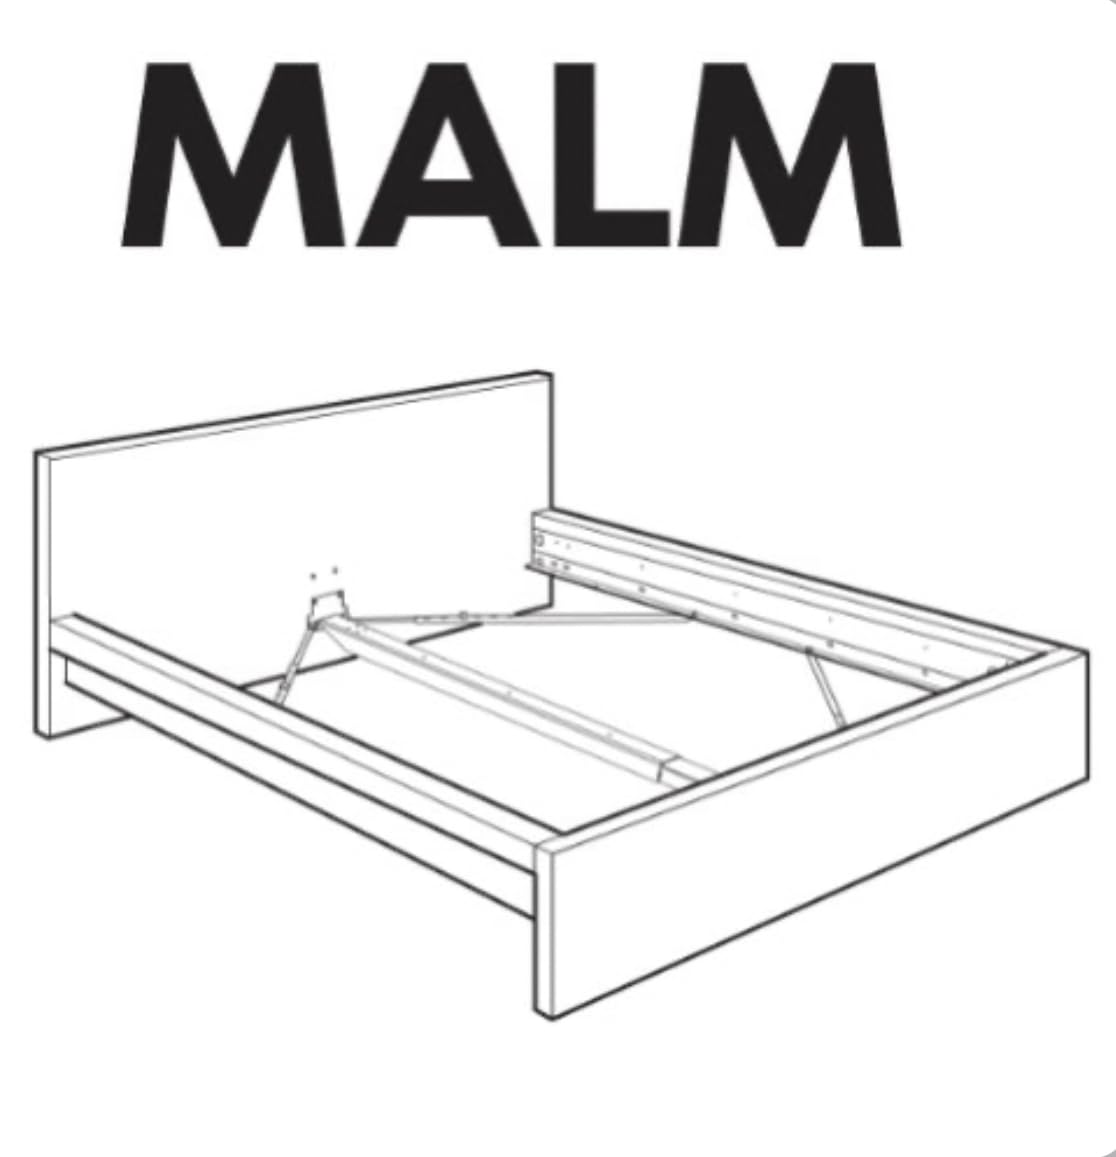 IKEA MALM Bed Frame Hardware (Compatible with Low & High Malm Bed Frame) Replacement Parts for Assembling Beds